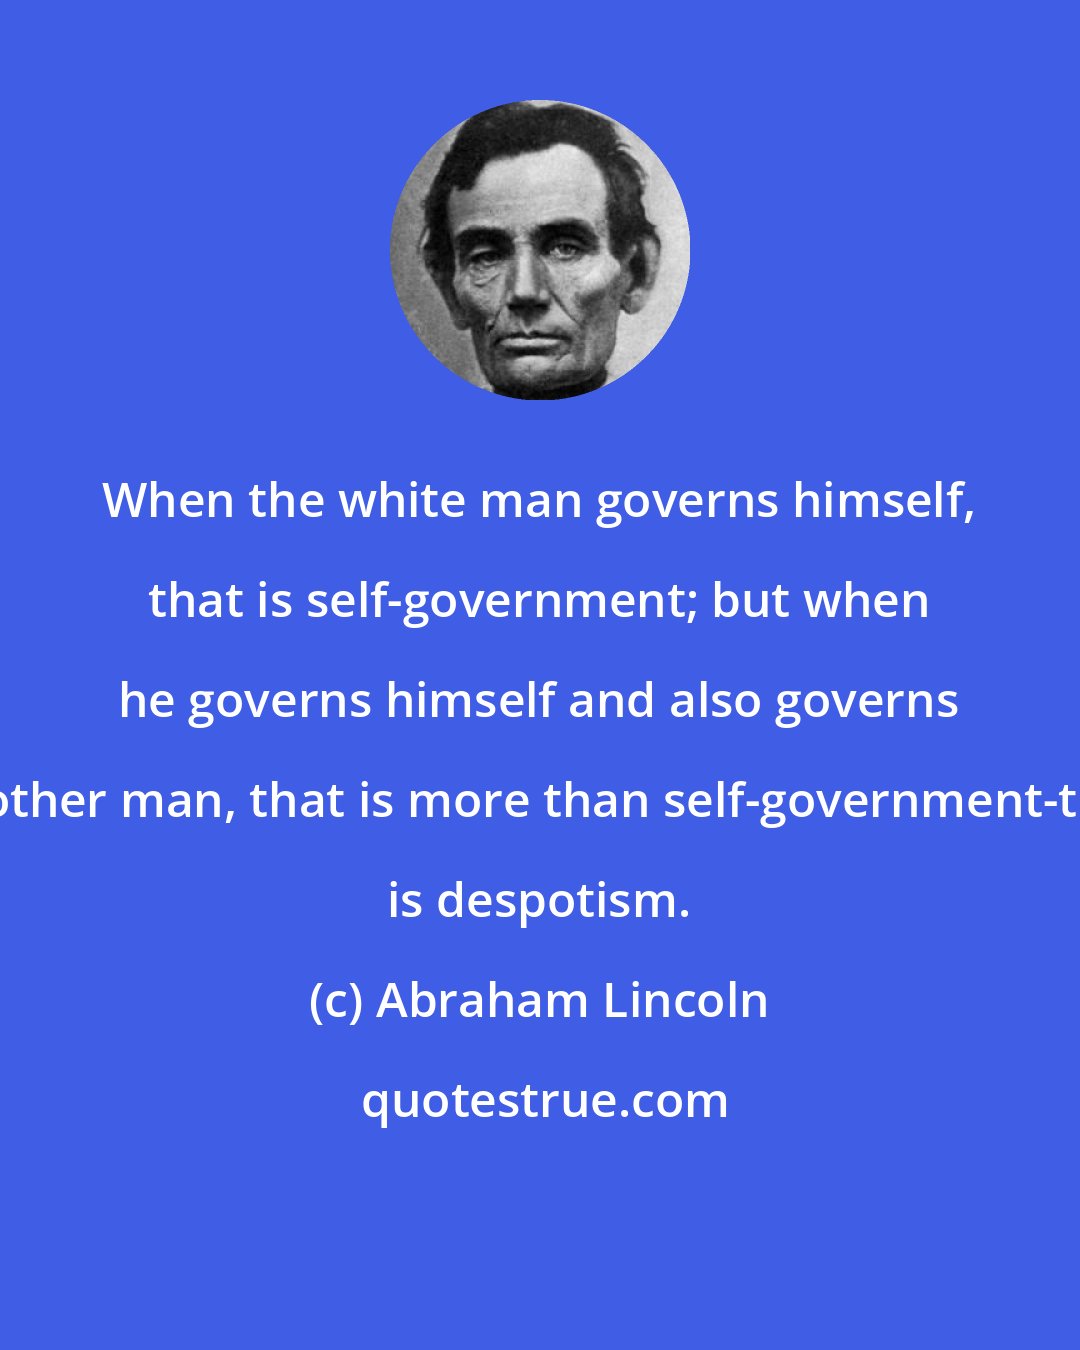 Abraham Lincoln: When the white man governs himself, that is self-government; but when he governs himself and also governs another man, that is more than self-government-that is despotism.